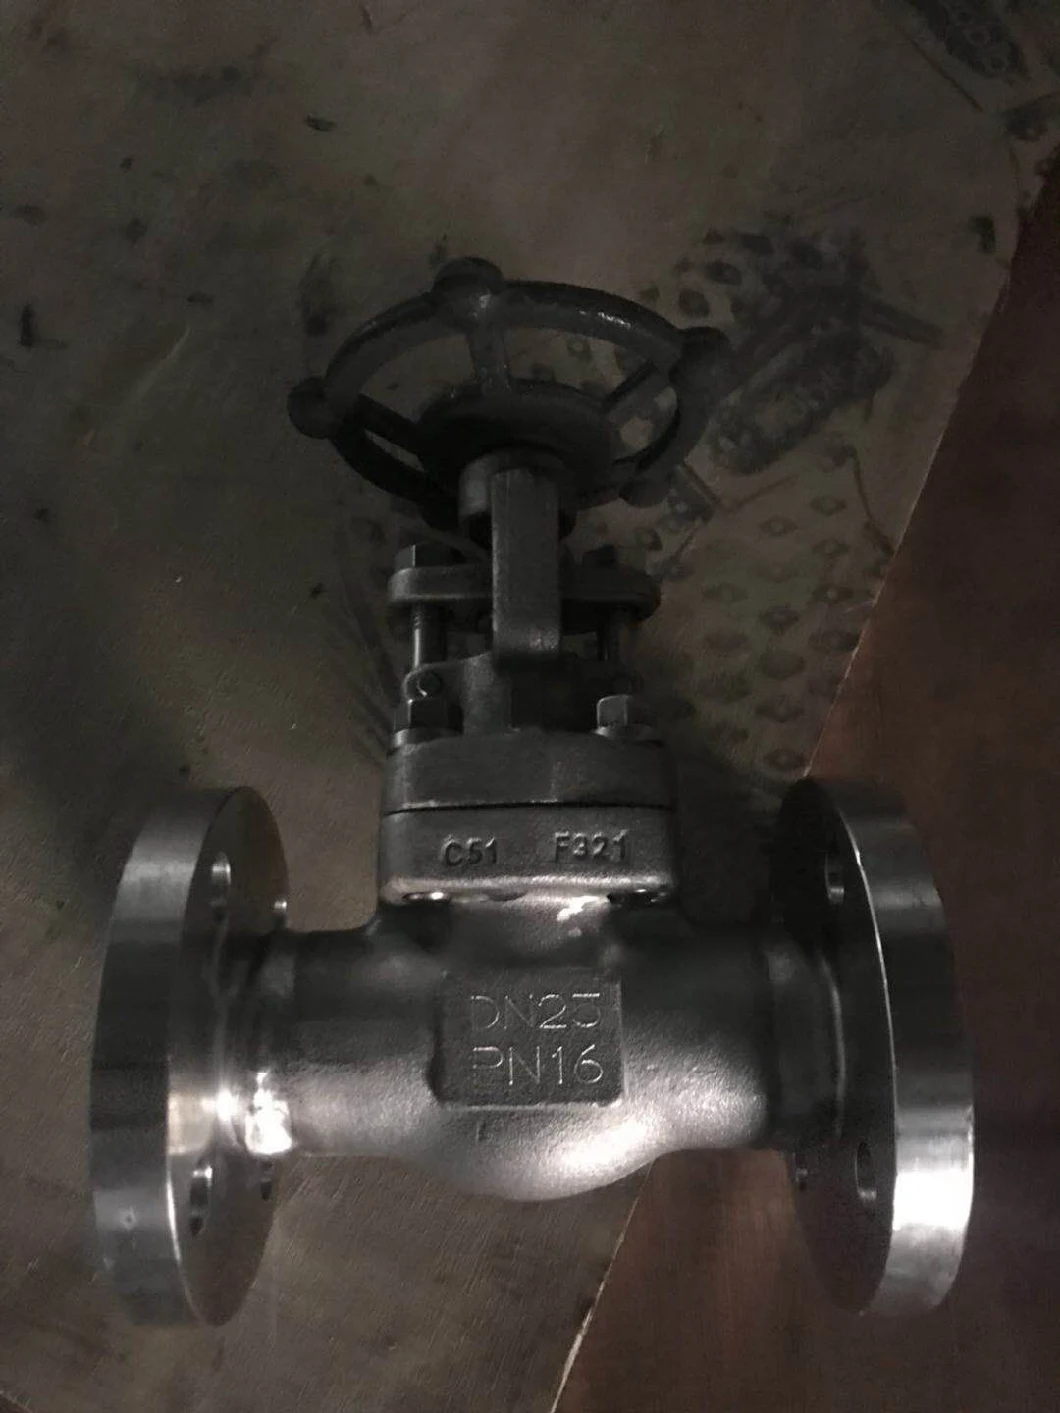 GOST Flanged Forged Steel Globe Valve Manufacturer with Lf2 F321 A105 Body Materials